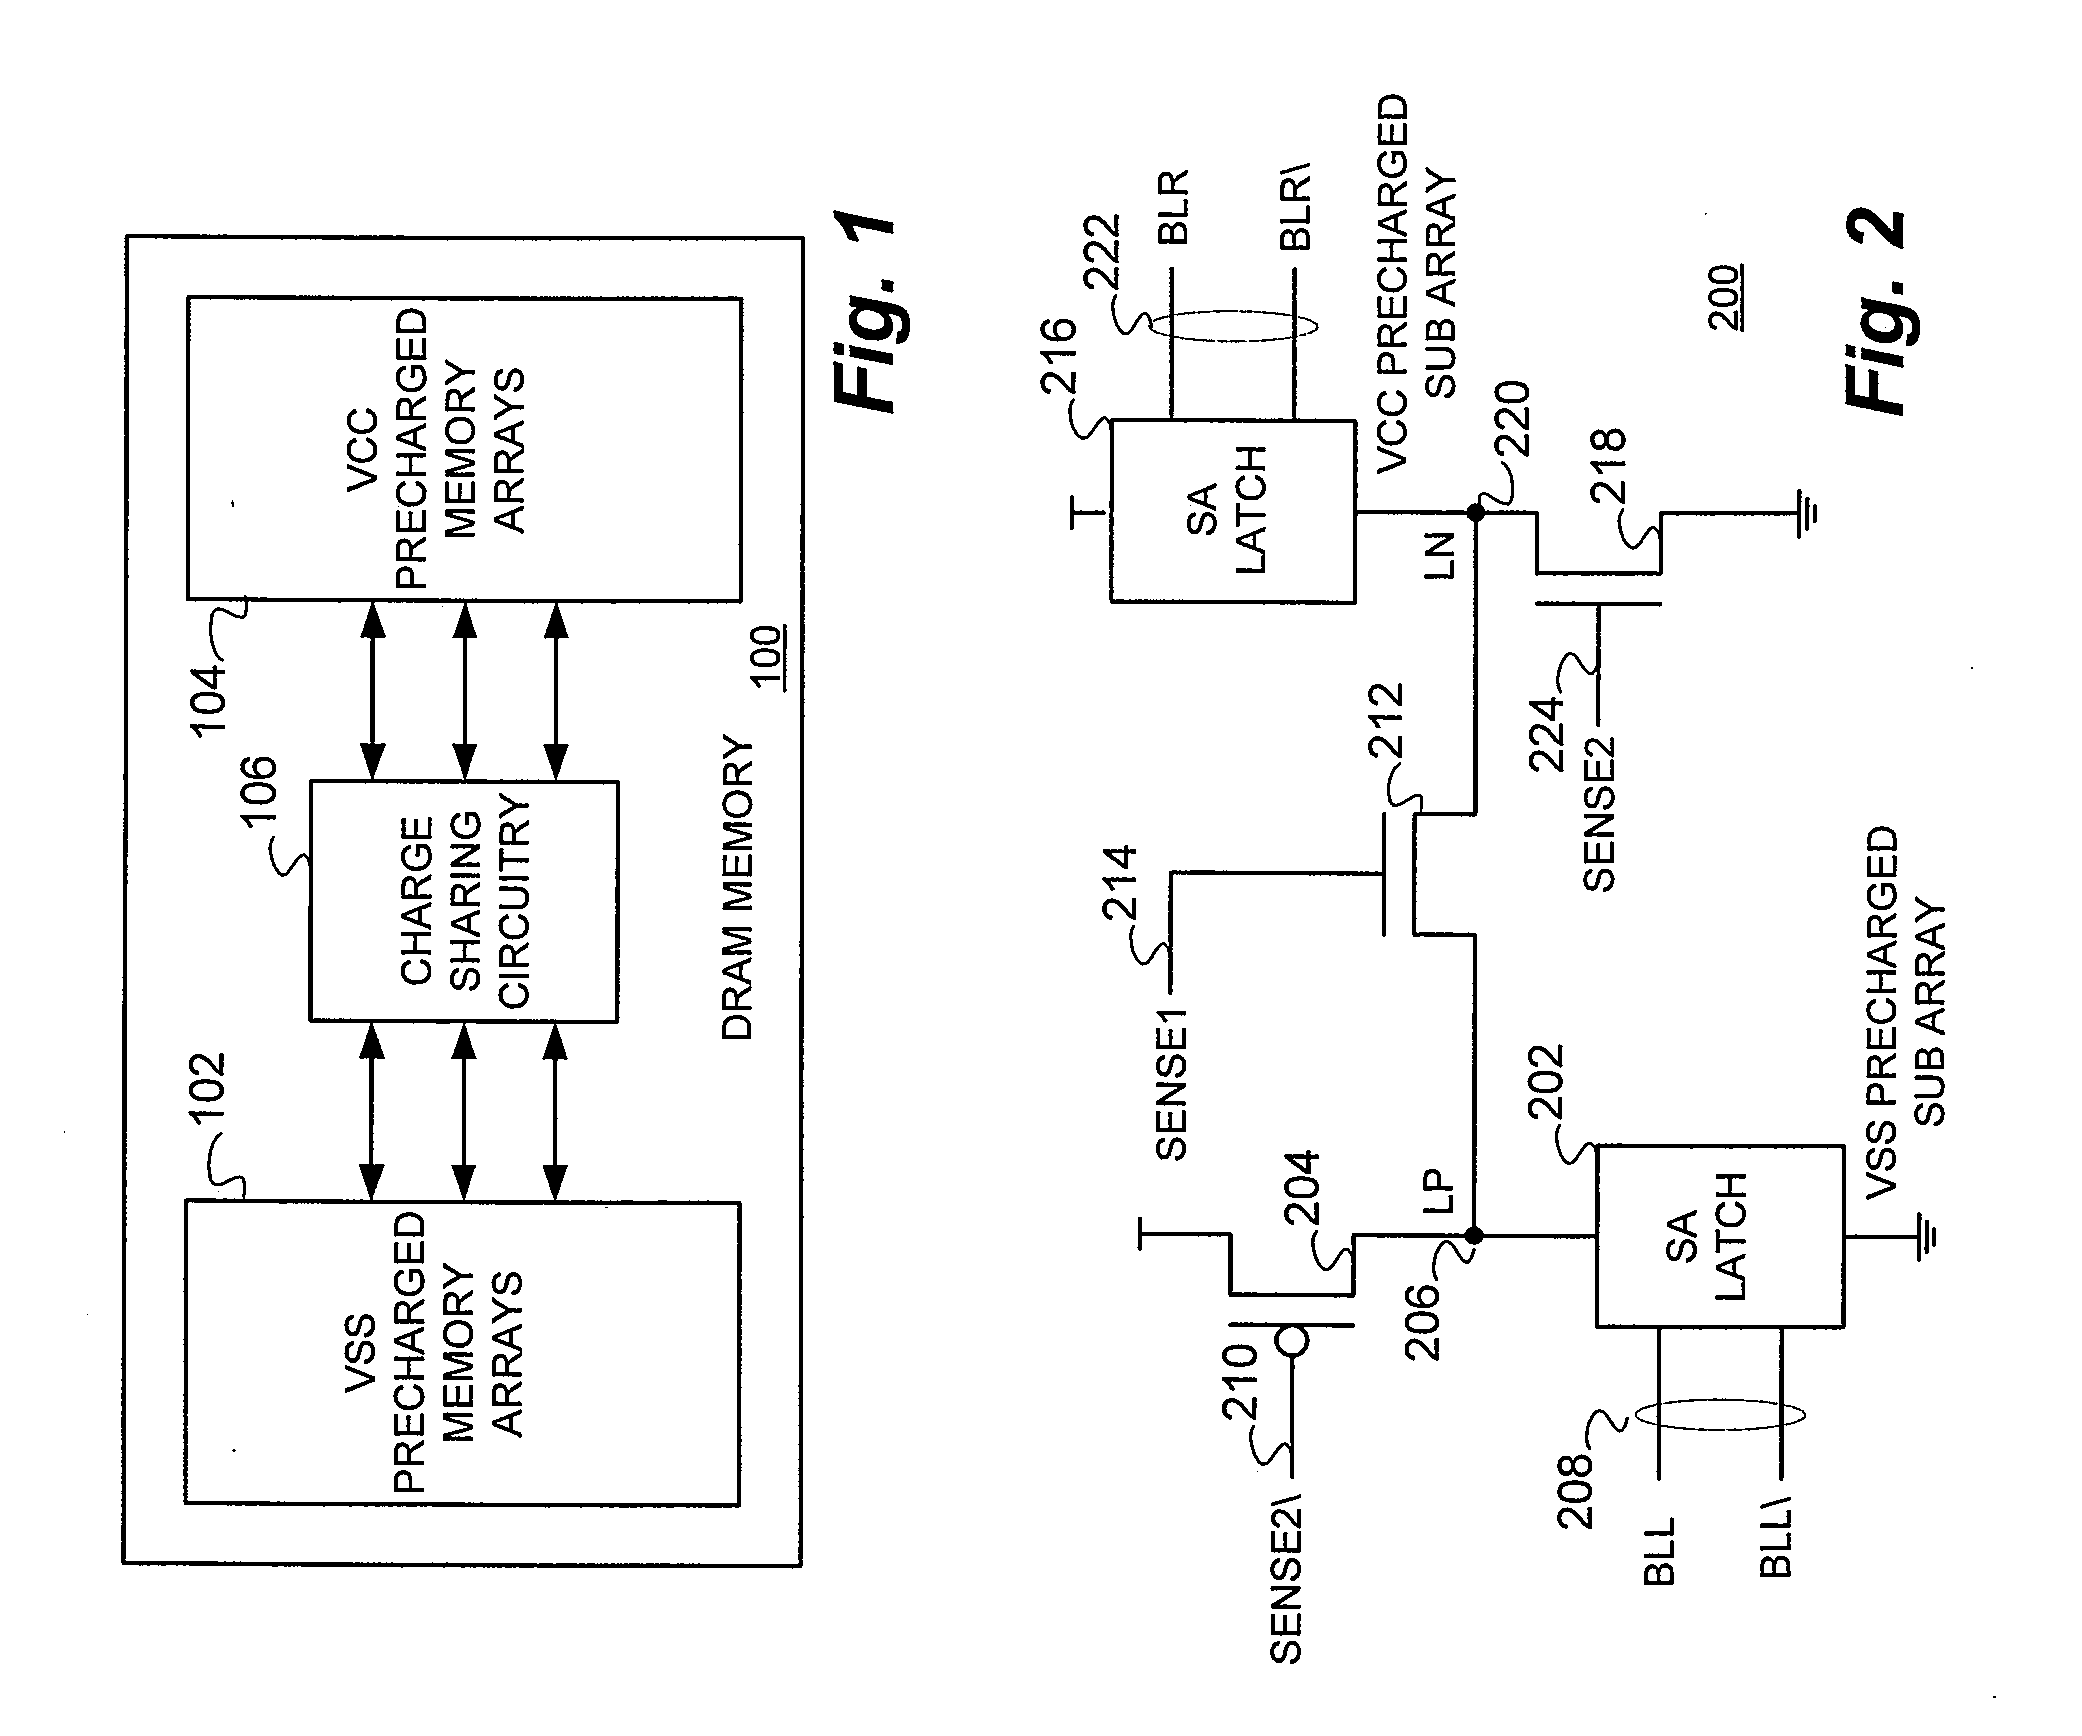 Dual bit line precharge architecture and method for low power dynamic random access memory (DRAM) integrated circuit devices and devices incorporating embedded dram